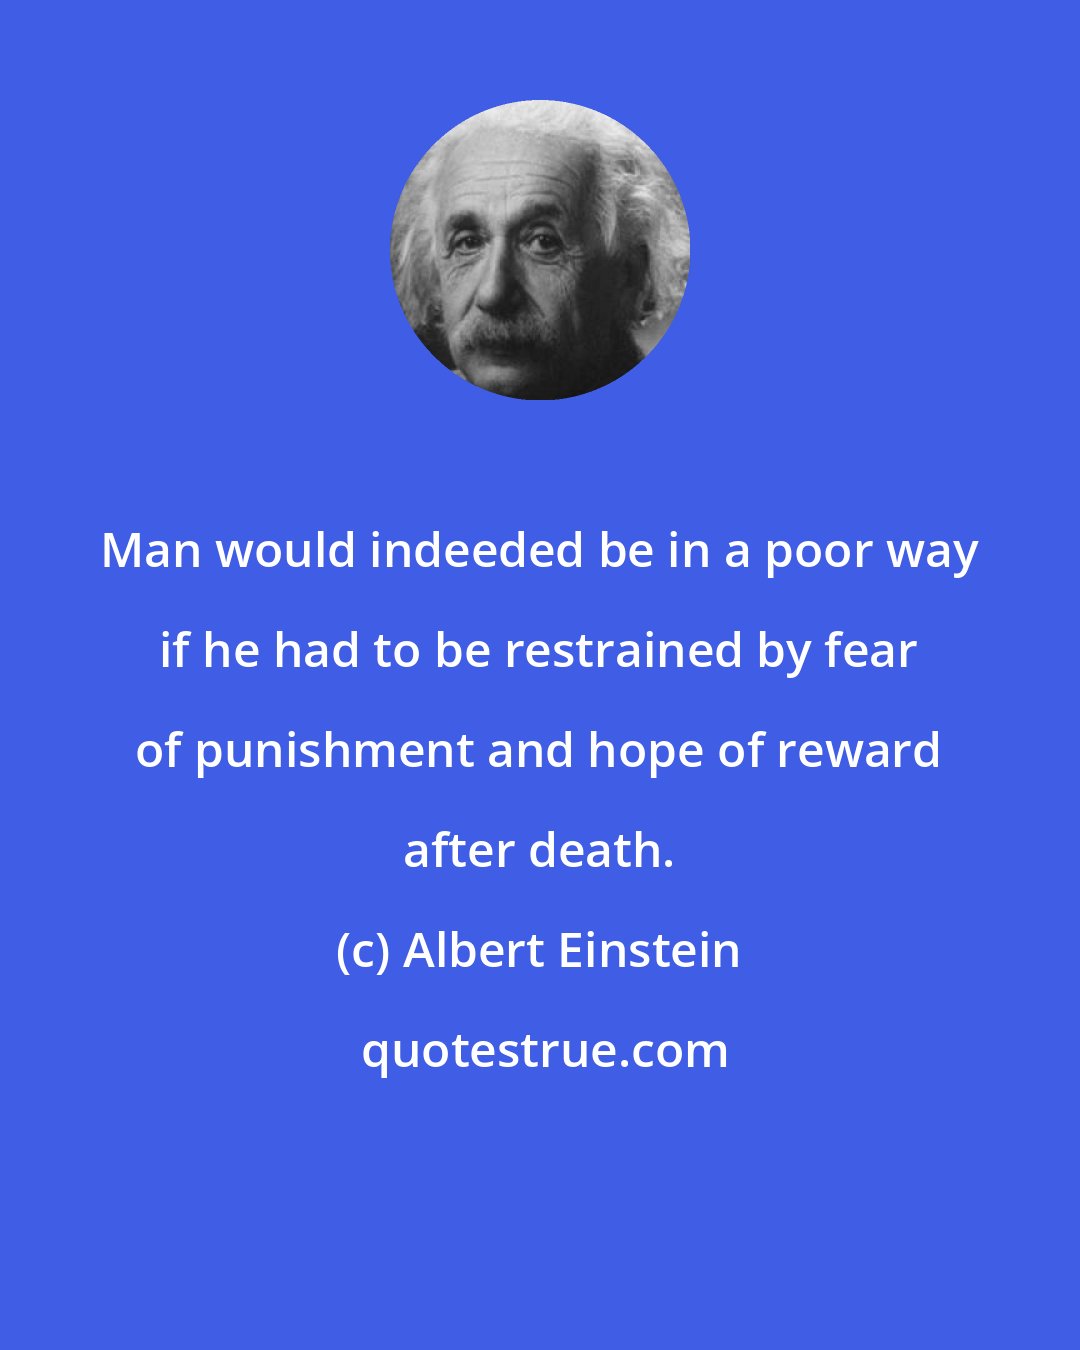 Albert Einstein: Man would indeeded be in a poor way if he had to be restrained by fear of punishment and hope of reward after death.